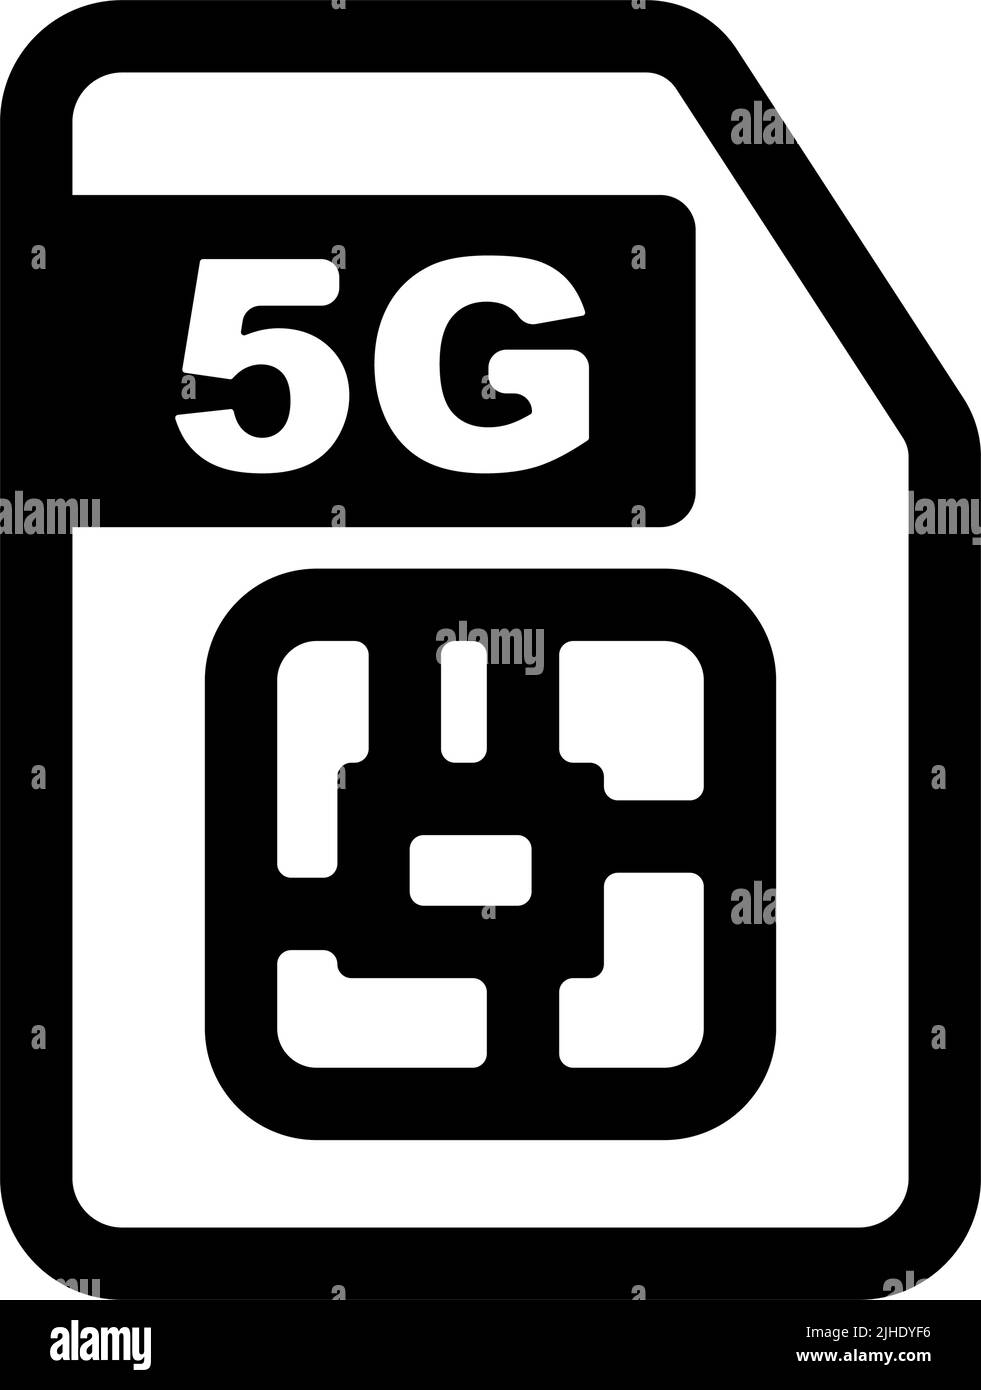 2g, 3g, 4g, 5g, 6g Circuit Microchip SIM Card Emblem Isolated Over White  Background Stock Photo, Picture and Royalty Free Image. Image 19797689.